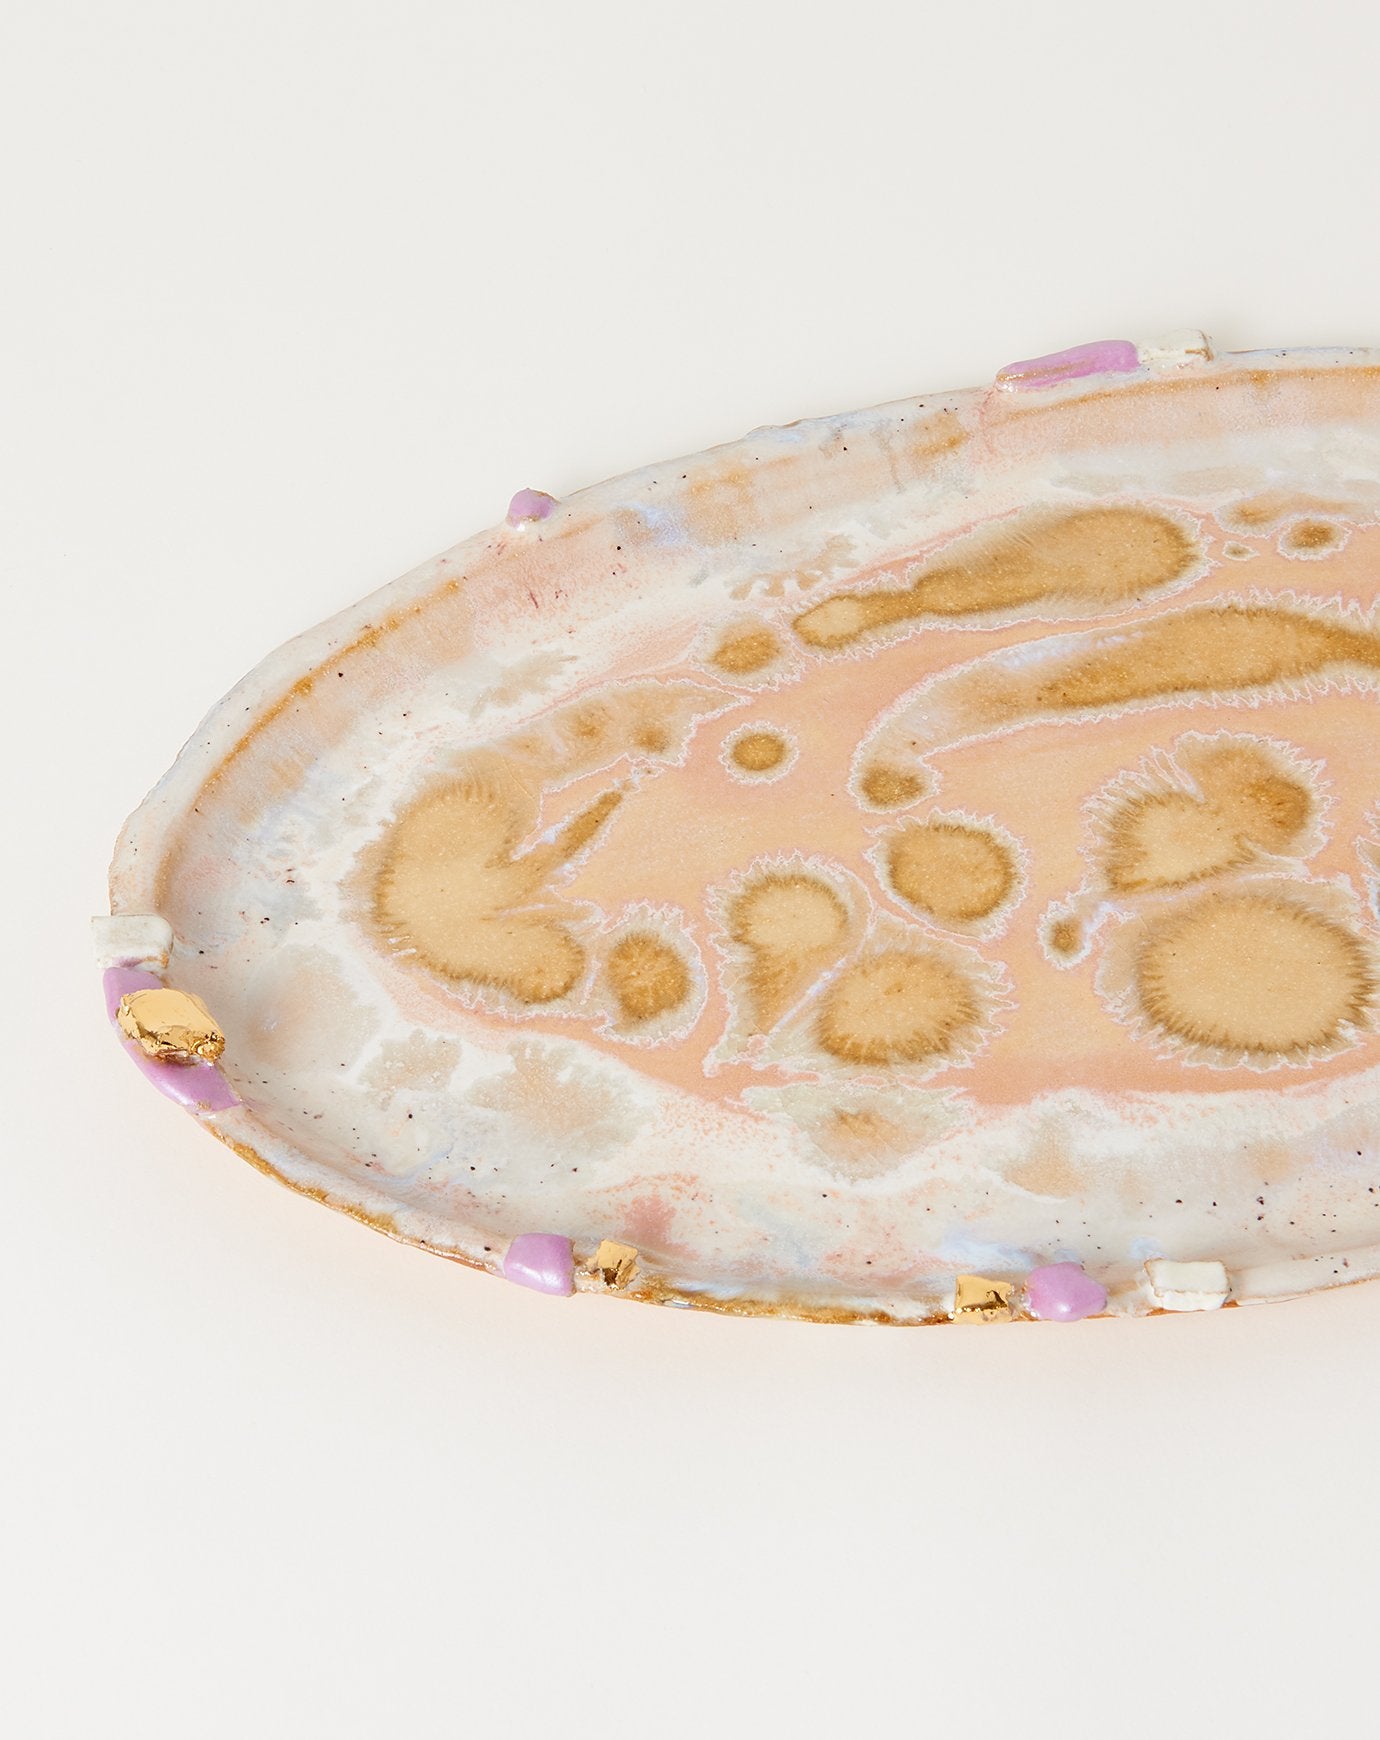 Minh Singer X-Large Ambrosia Oval Platter with Lilac Crust in Beach